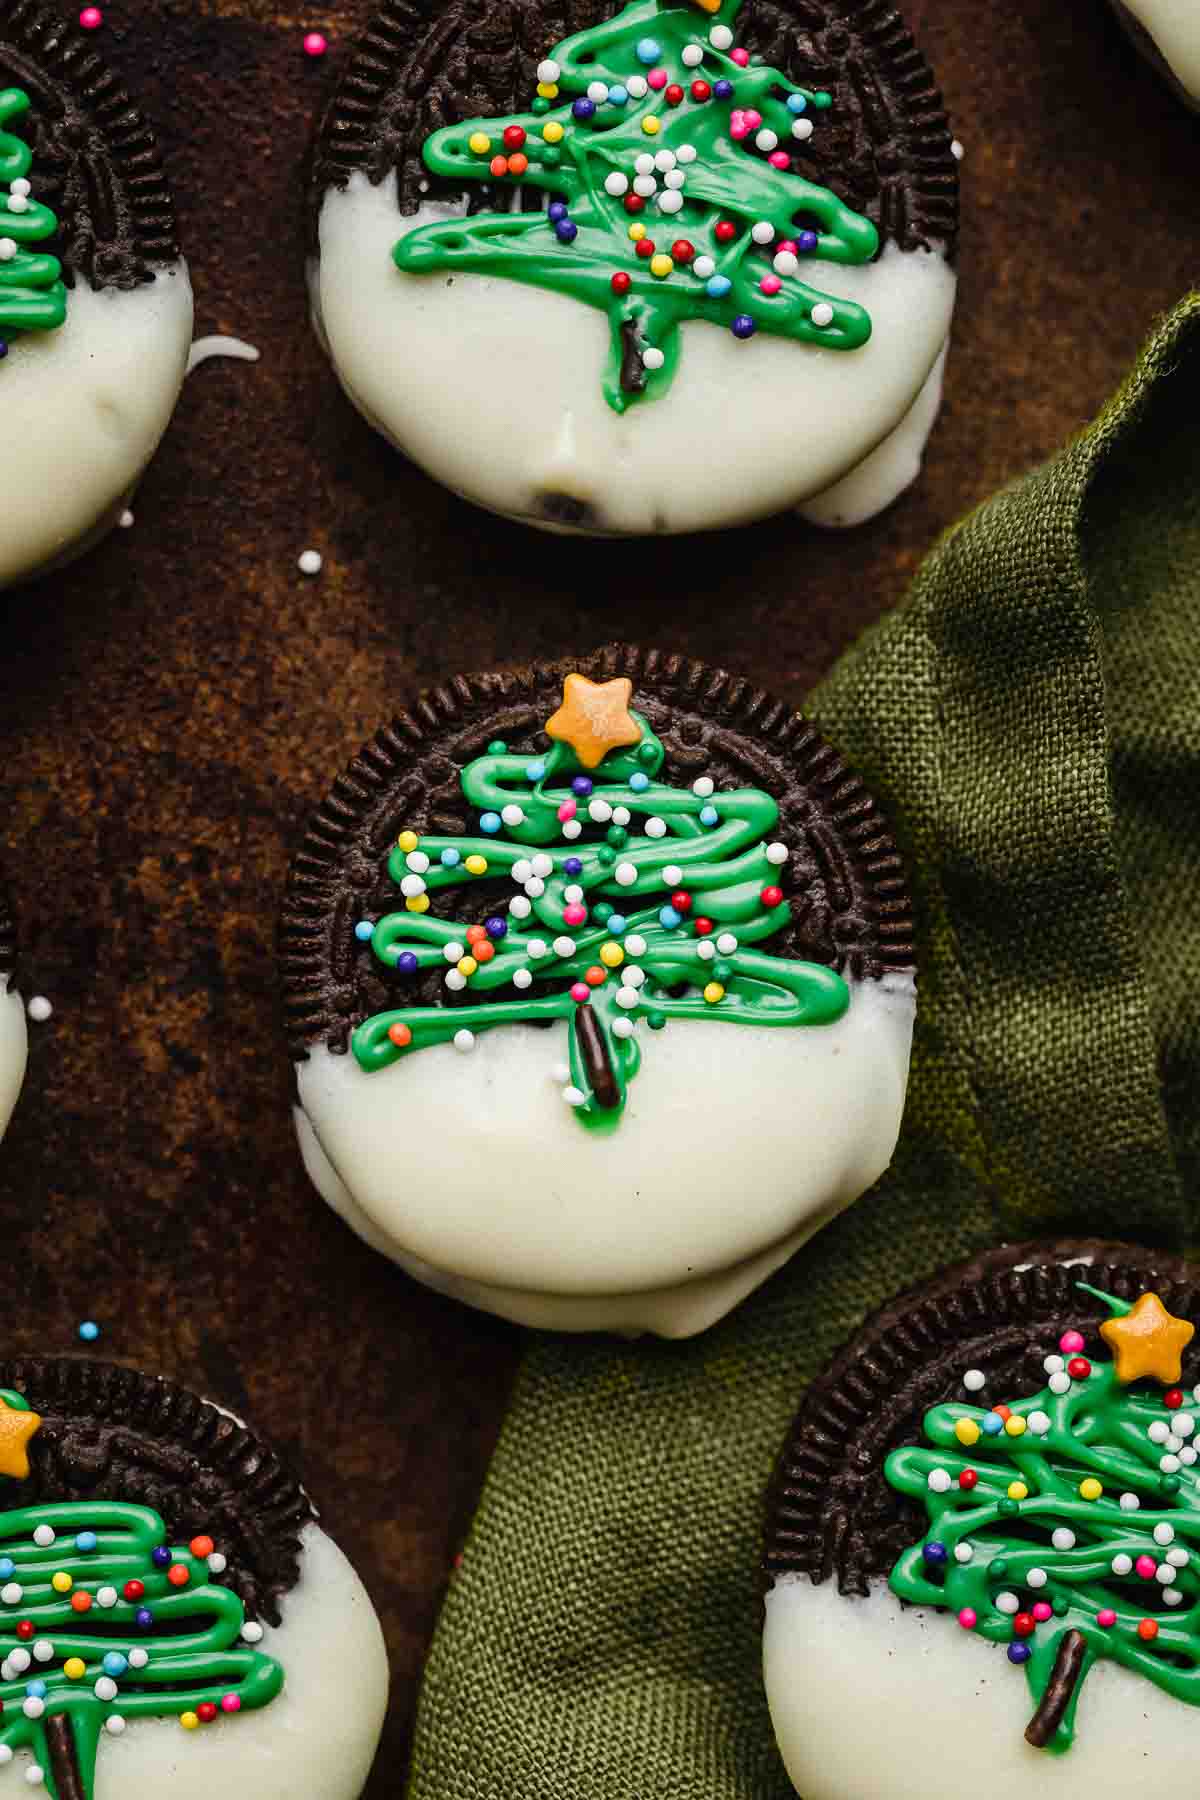 Christmas Oreo on a green linen napkin, the Oreo is half dipped in white chocolate then has a green abstract christmas tree piped on the Oreo and sprinkled with nonpareil sprinkles and a star sprinkle on top.